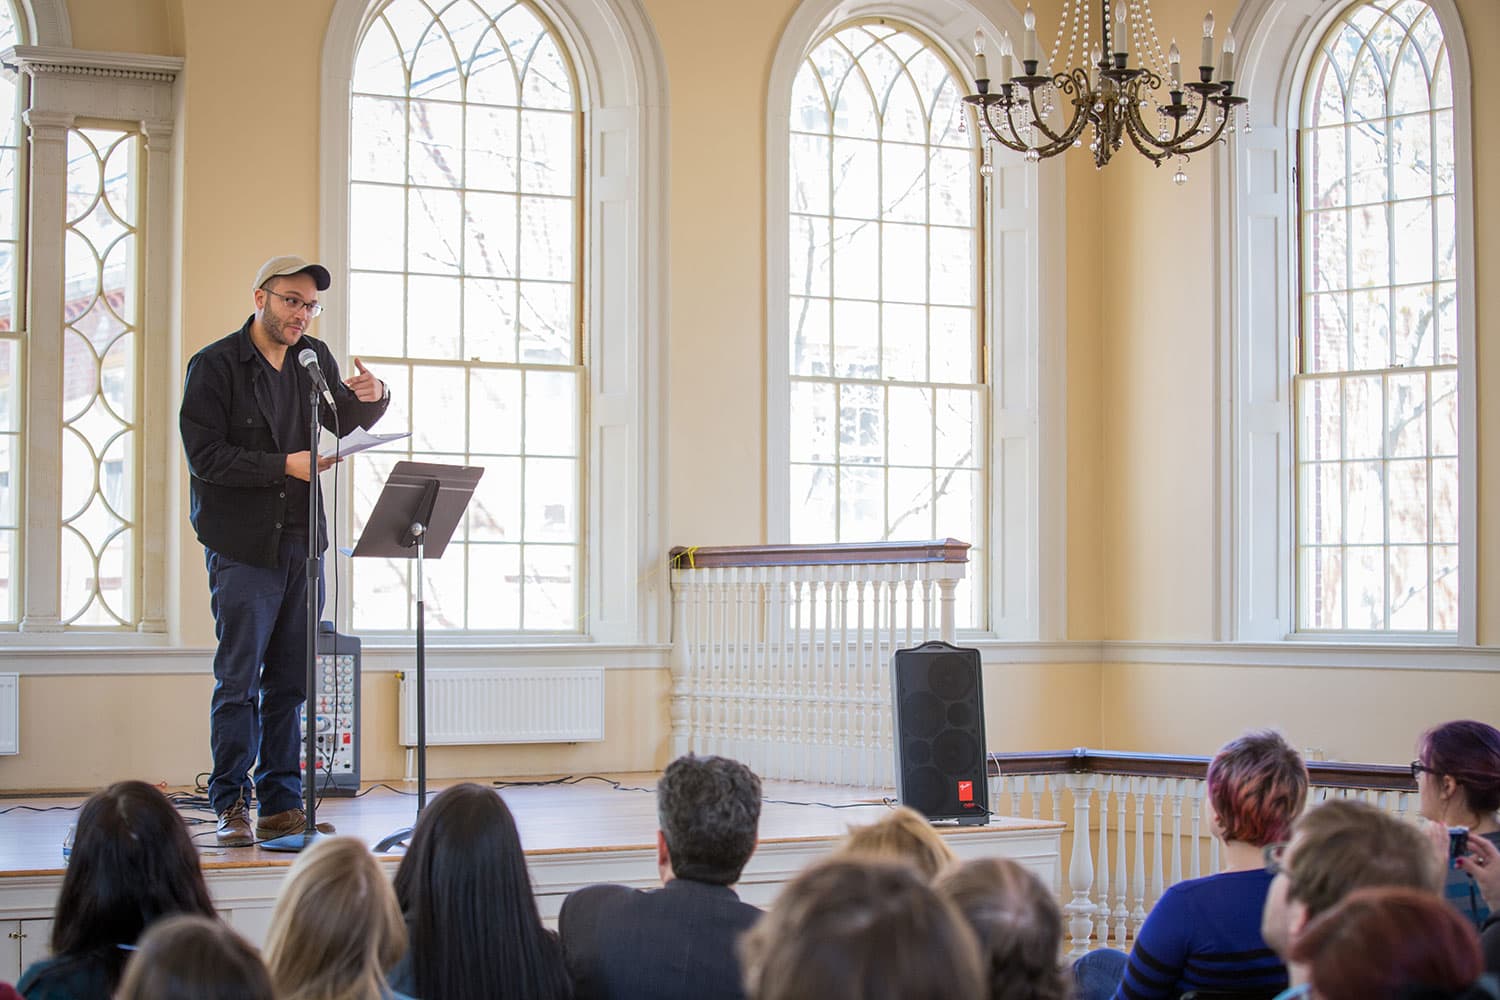 A previous year's Massachusetts Poetry Festival event at Salem’s Old Town Hall. (Courtesy Massachusetts Poetry Festival.)